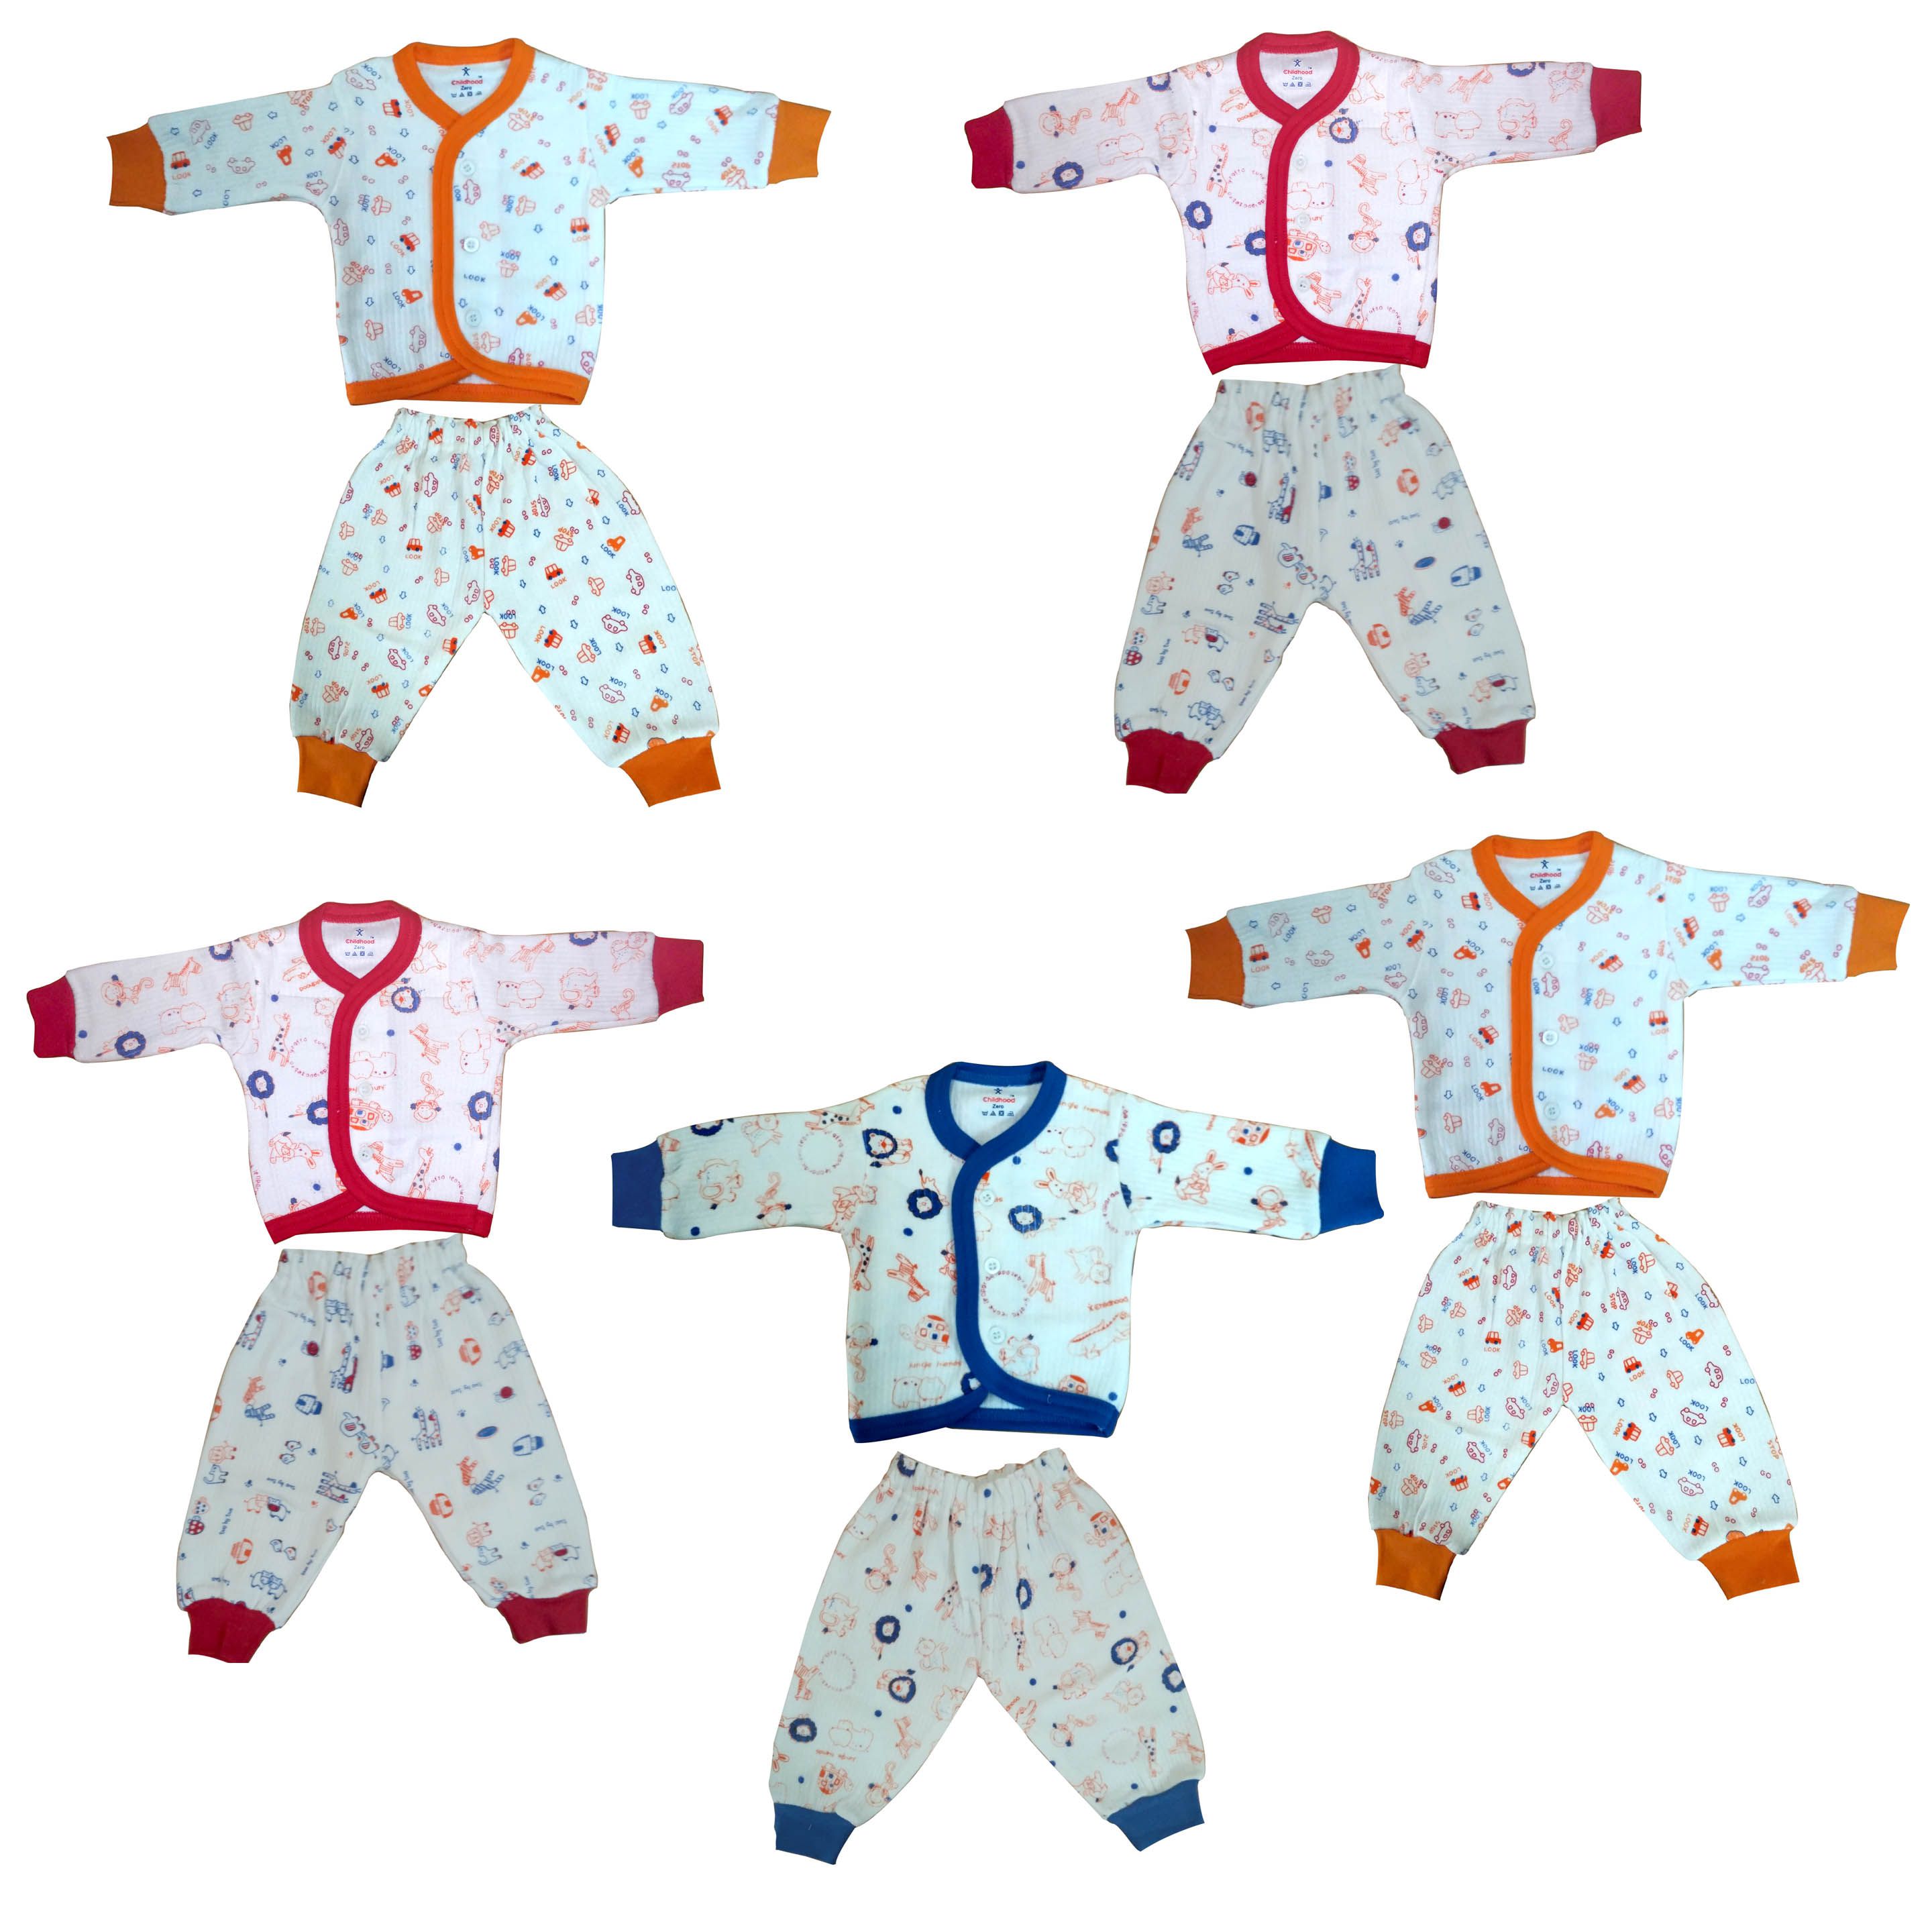 Newborn Baby Care Thermal Top And Bottom Set .( Pack Of 5 Set ) - Buy ...